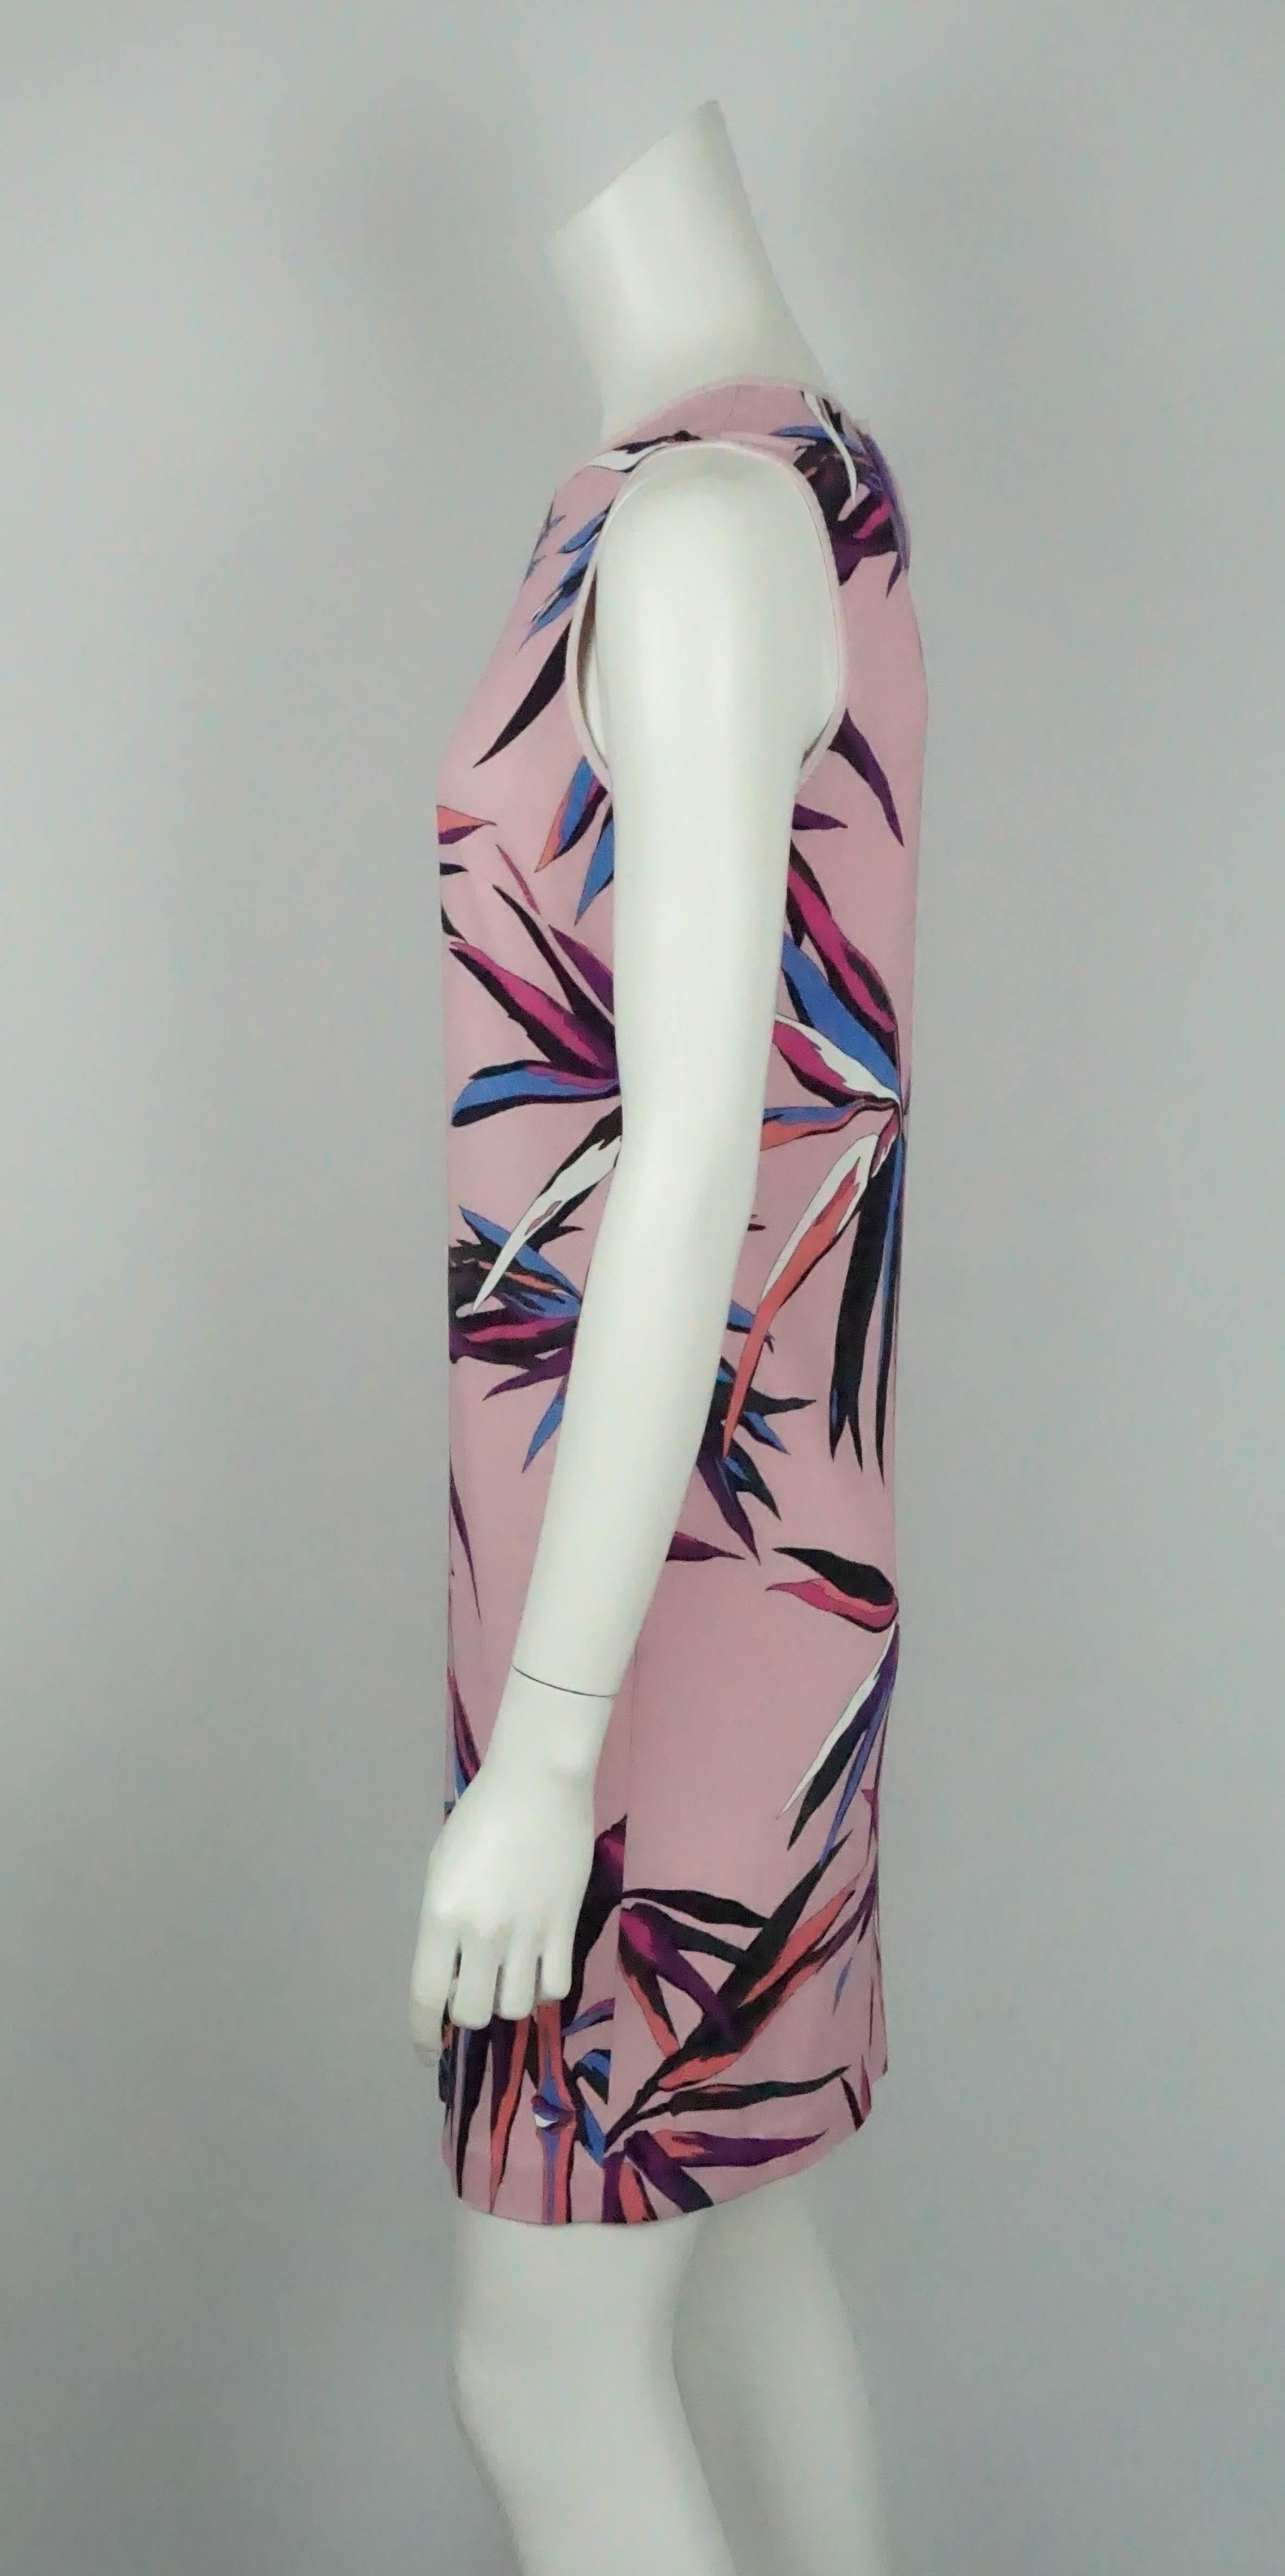 Emilio Pucci Pink and Multi Print Sleeveless Silk Shift Dress - 6  This beautiful creation is perfect for Spring. The dress is primarily a beautiful pink silk blend with a large floral print in purple, pink, blue, black, white and coral. The